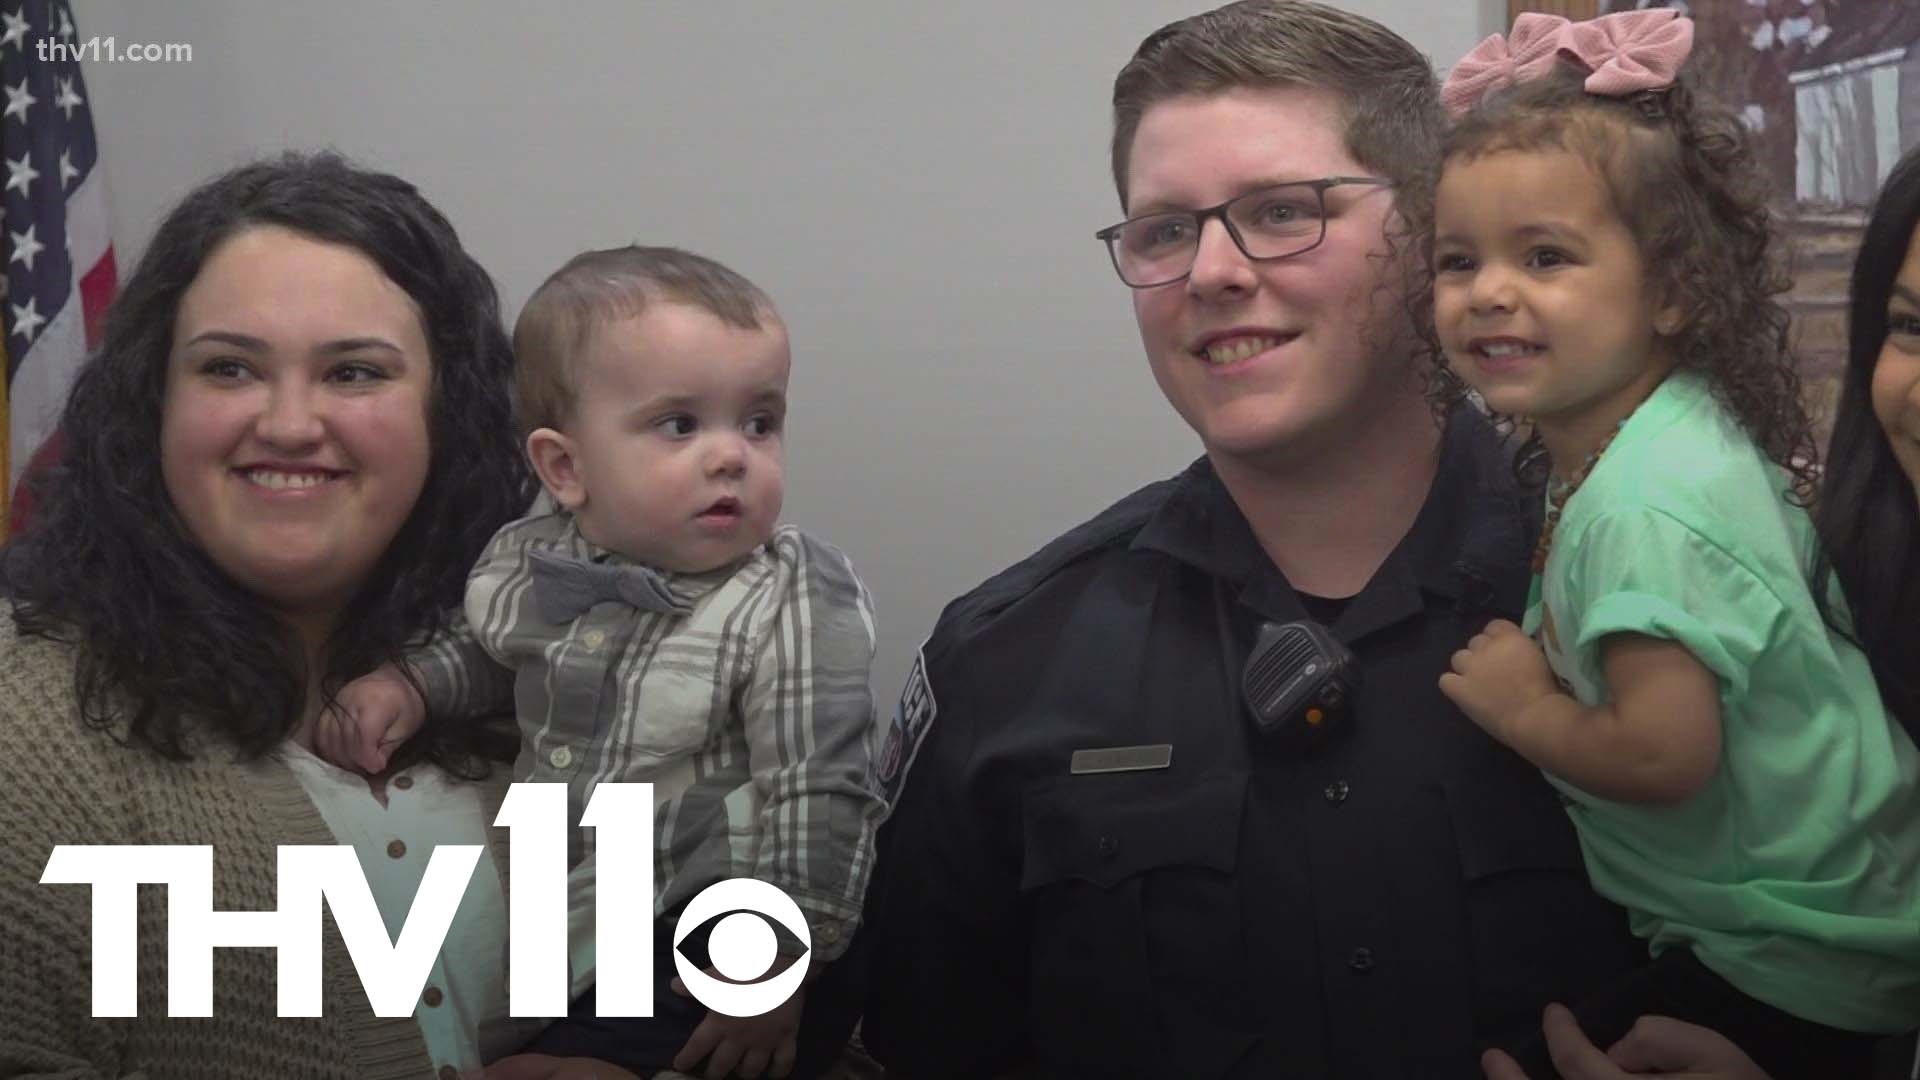 Officer Cody Hubbard is receiving national attention after his quick thinking saved the life of 3-week-old Grady who was suffering from cardiac arrest.